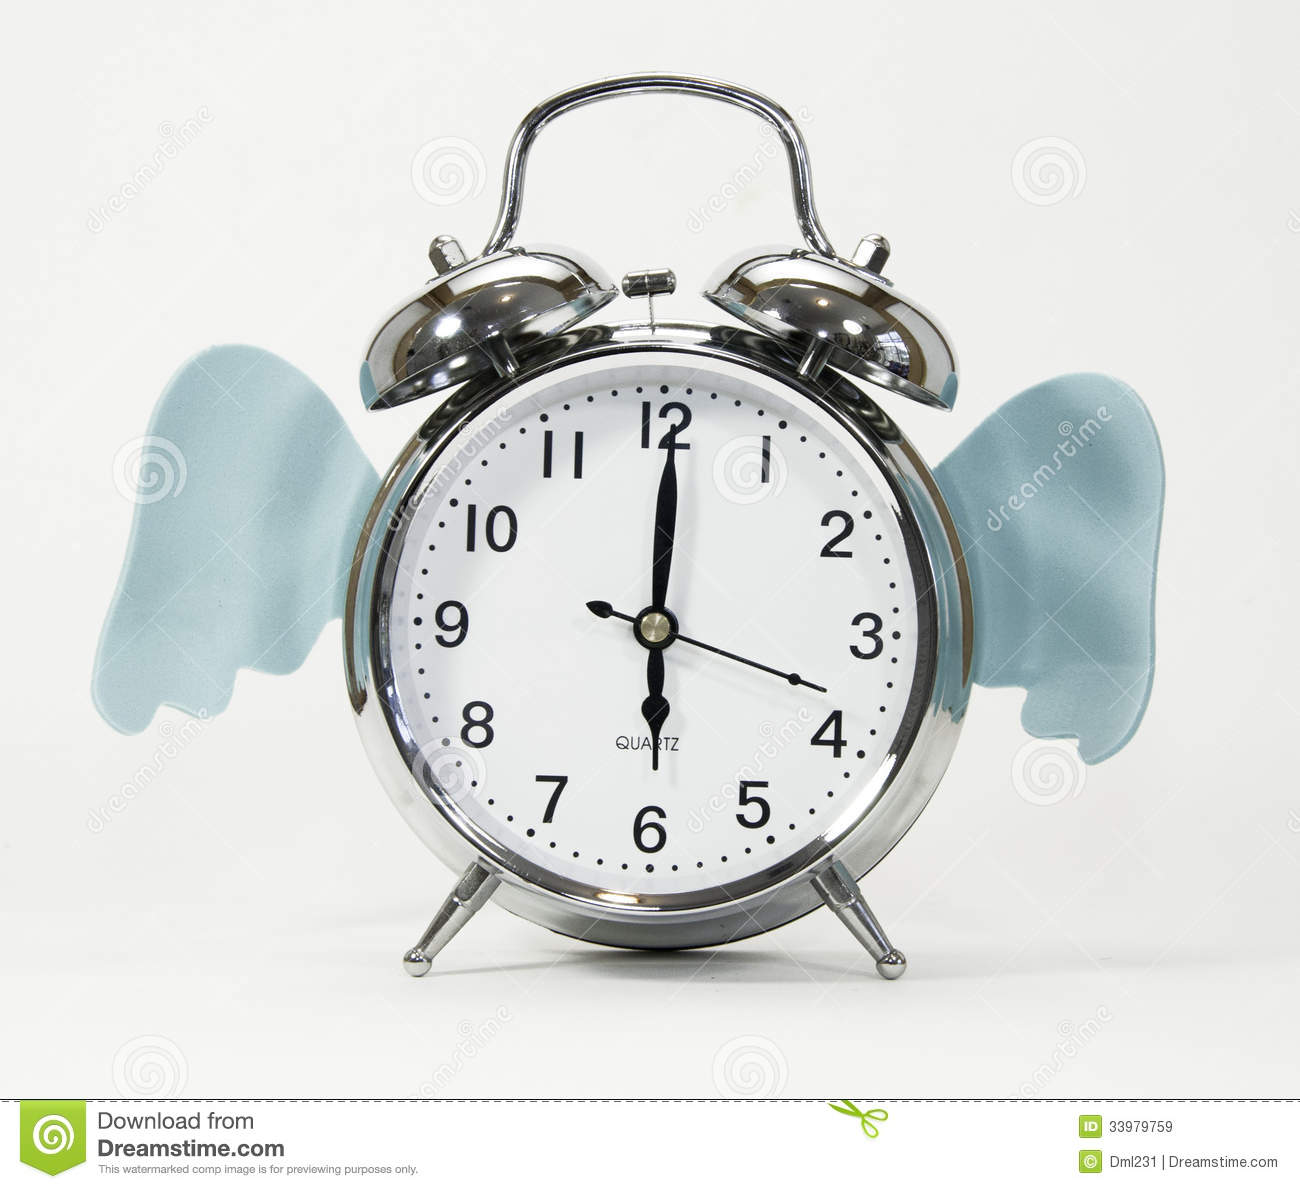 Vintage Silver Alarm Clock With Blue Wings Against A White Background